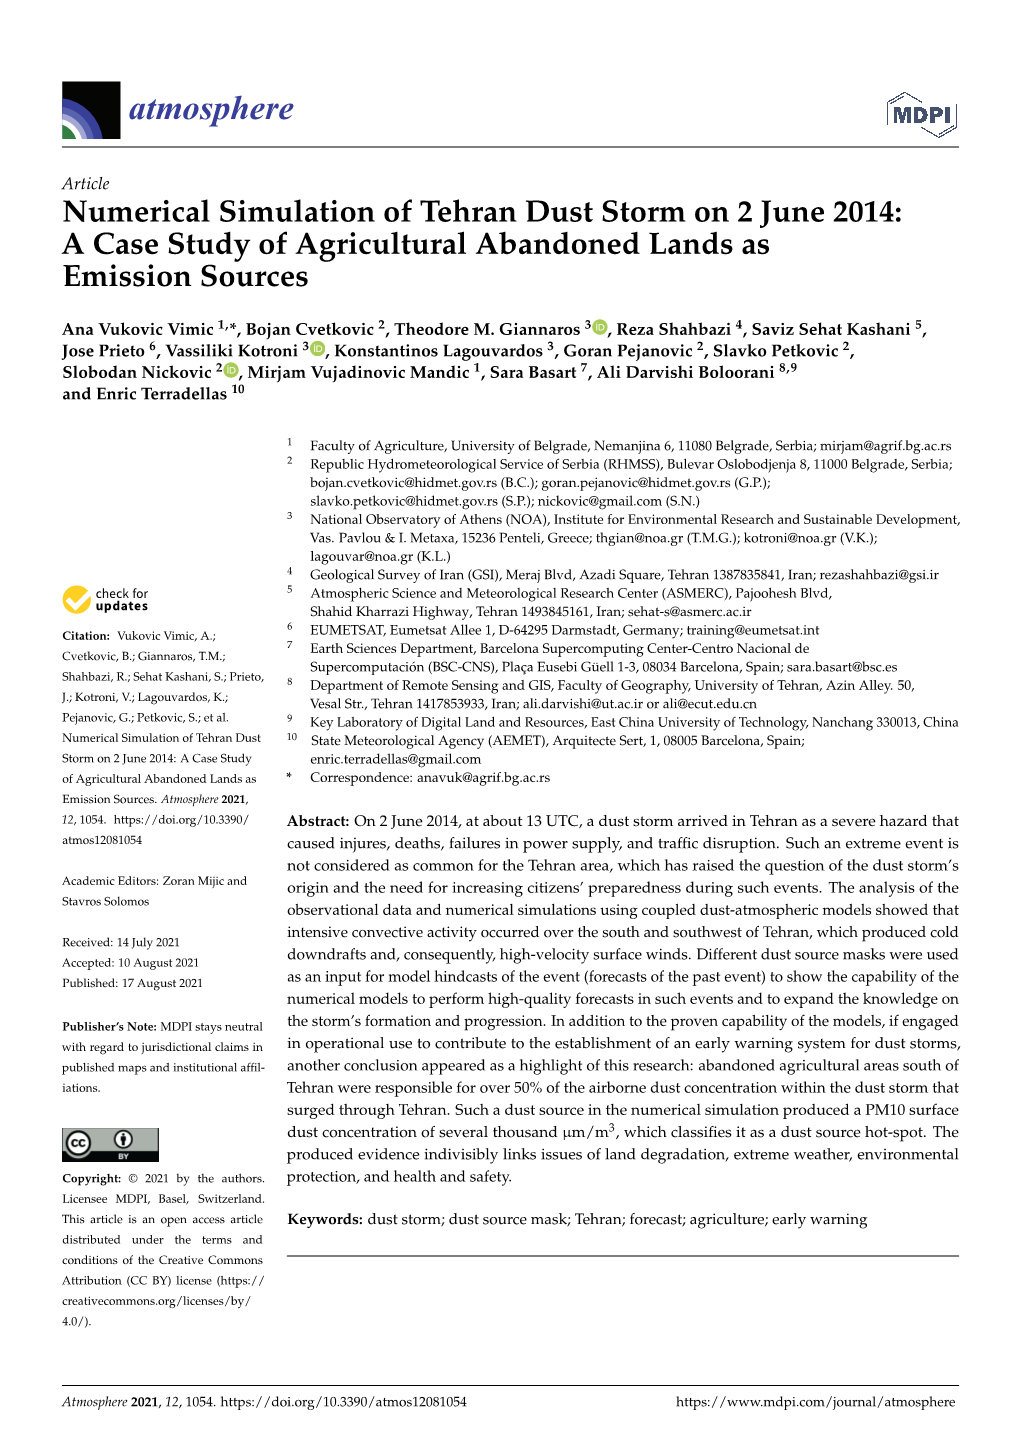 Numerical Simulation of Tehran Dust Storm on 2 June 2014: a Case Study of Agricultural Abandoned Lands As Emission Sources